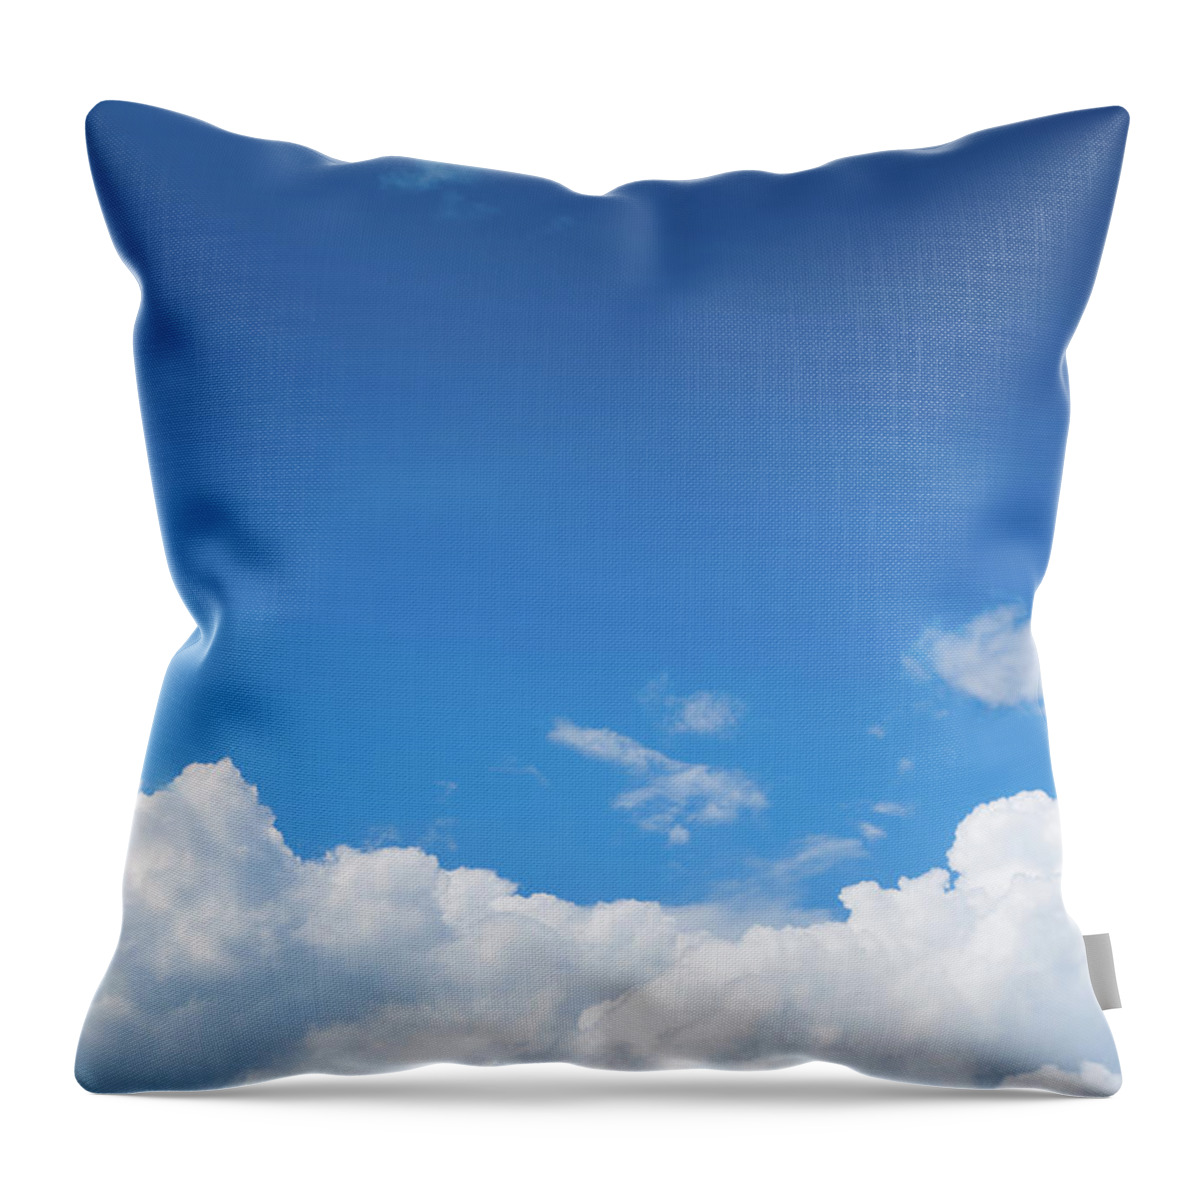 Scenics Throw Pillow featuring the photograph Blue Sky With Dramatic White Clouds by Primeimages